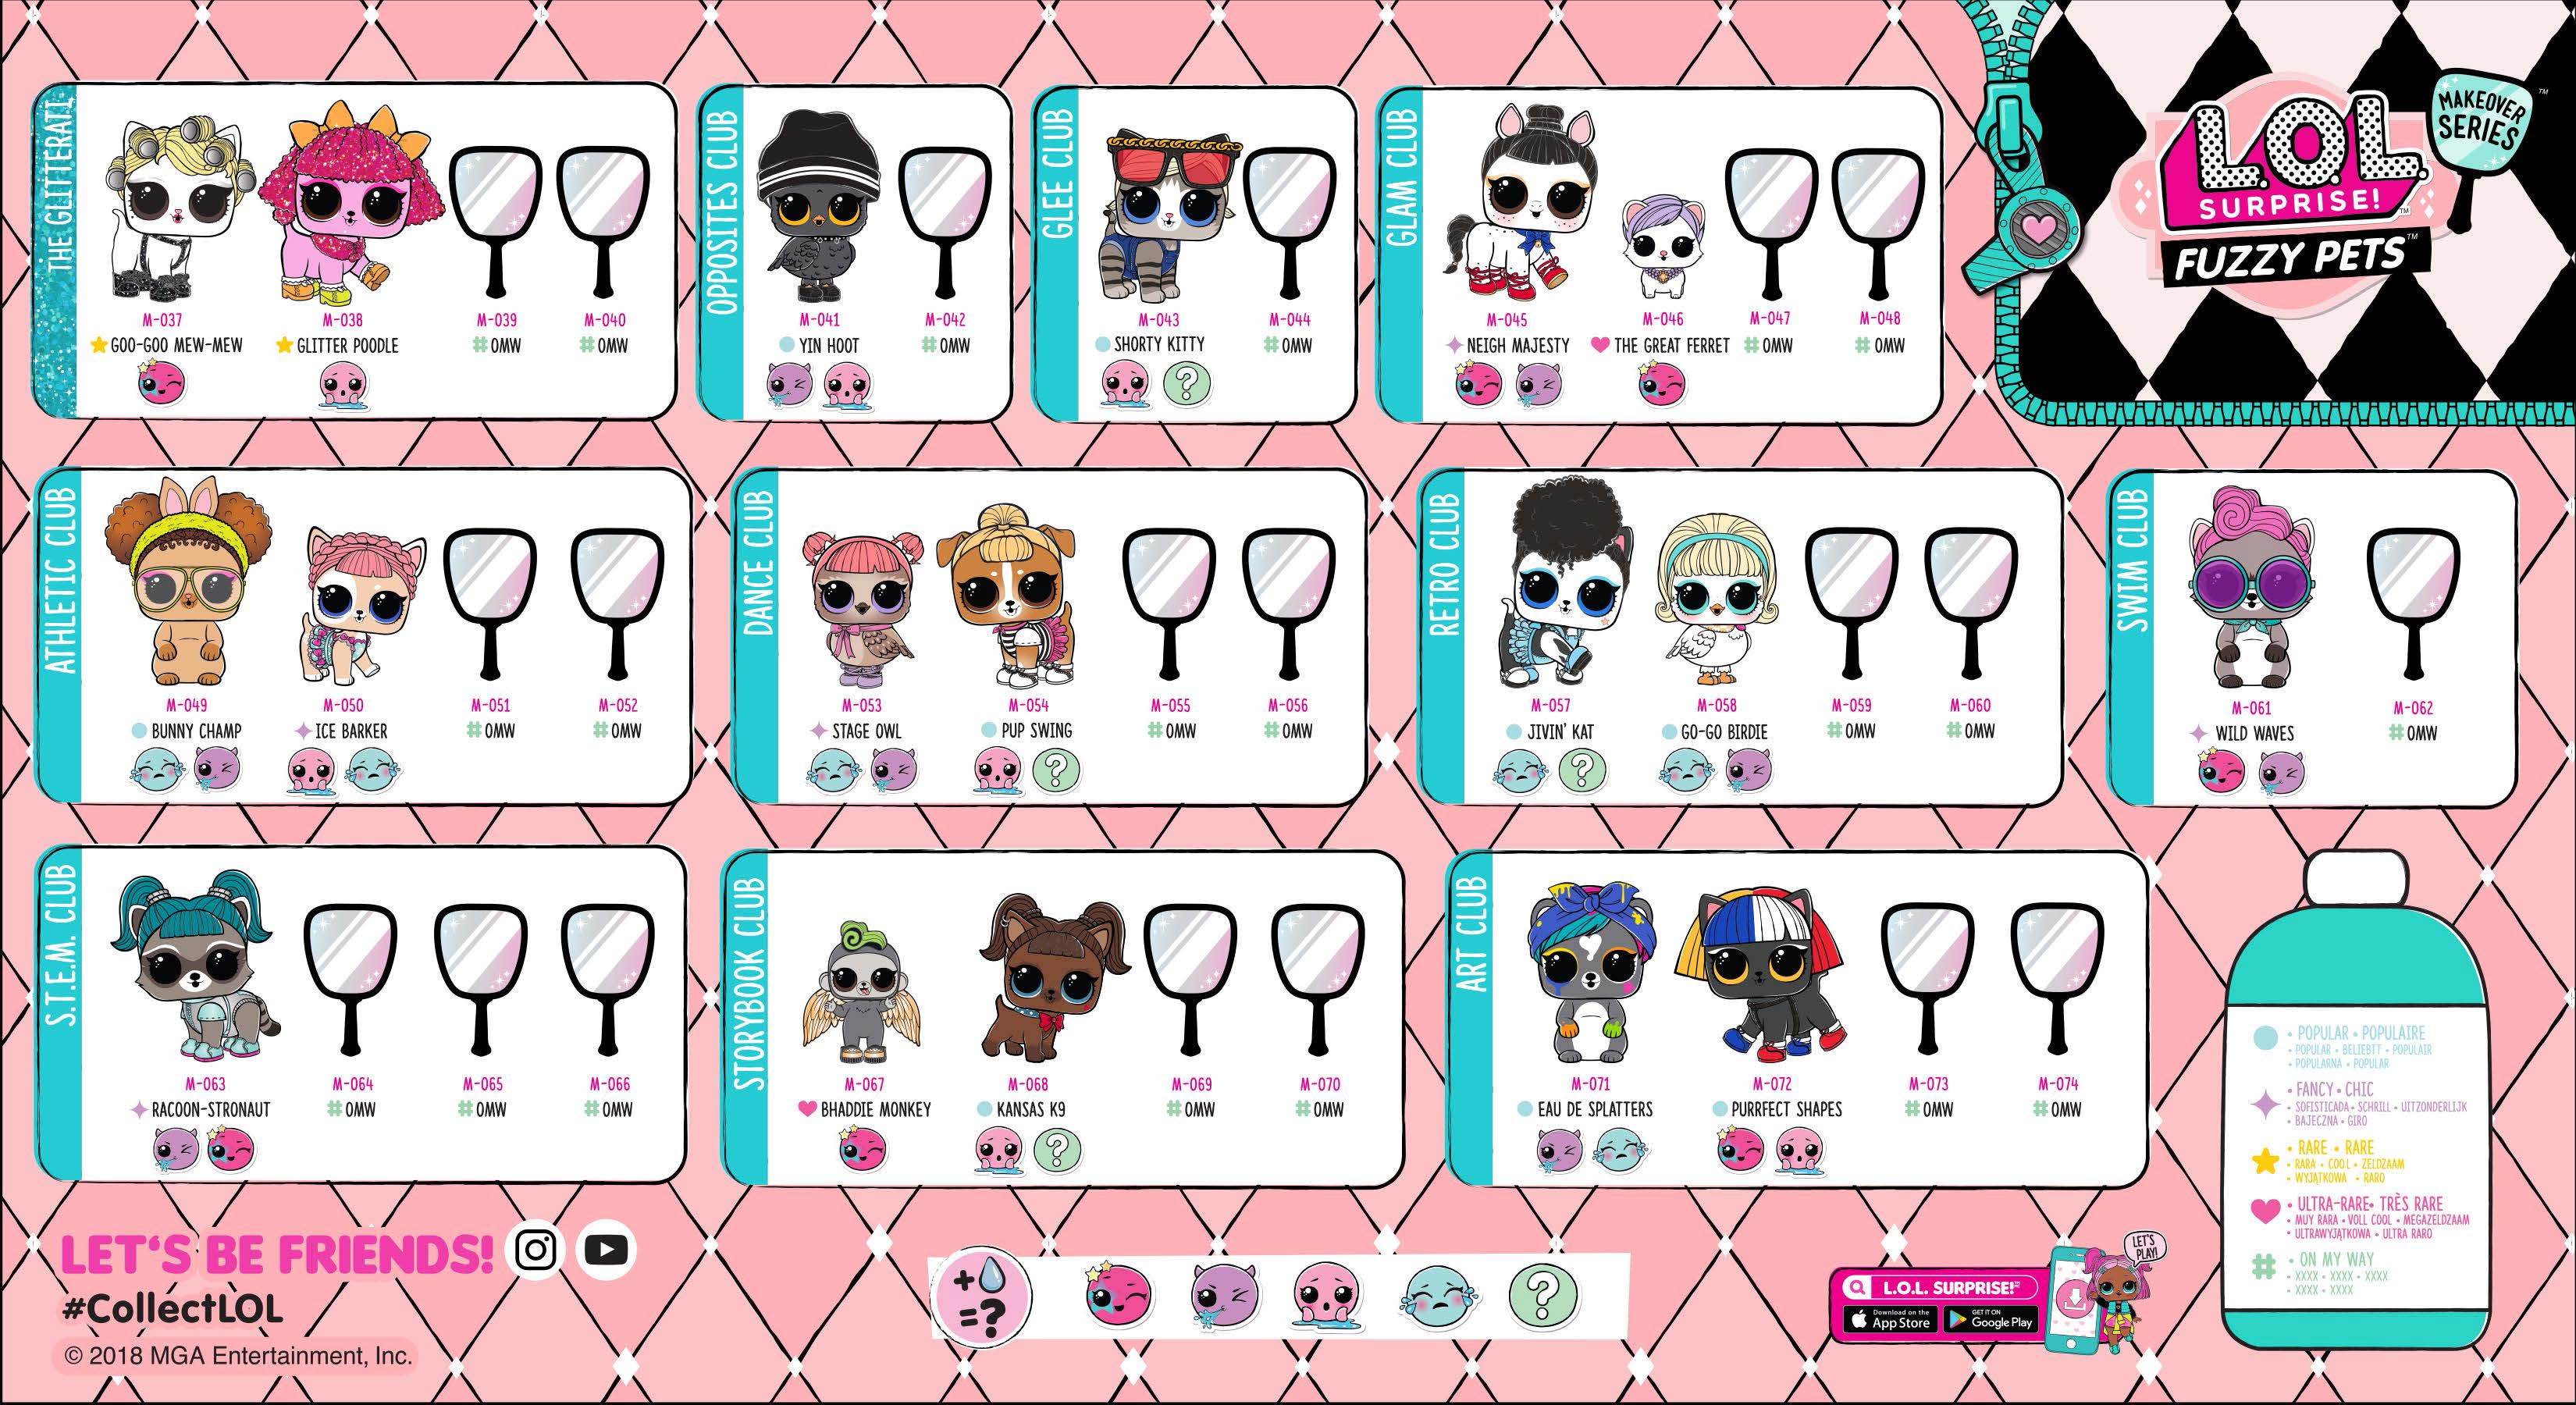 Lol Surprise Makeover Series 5 Collector Guide List Fuzzy Pets